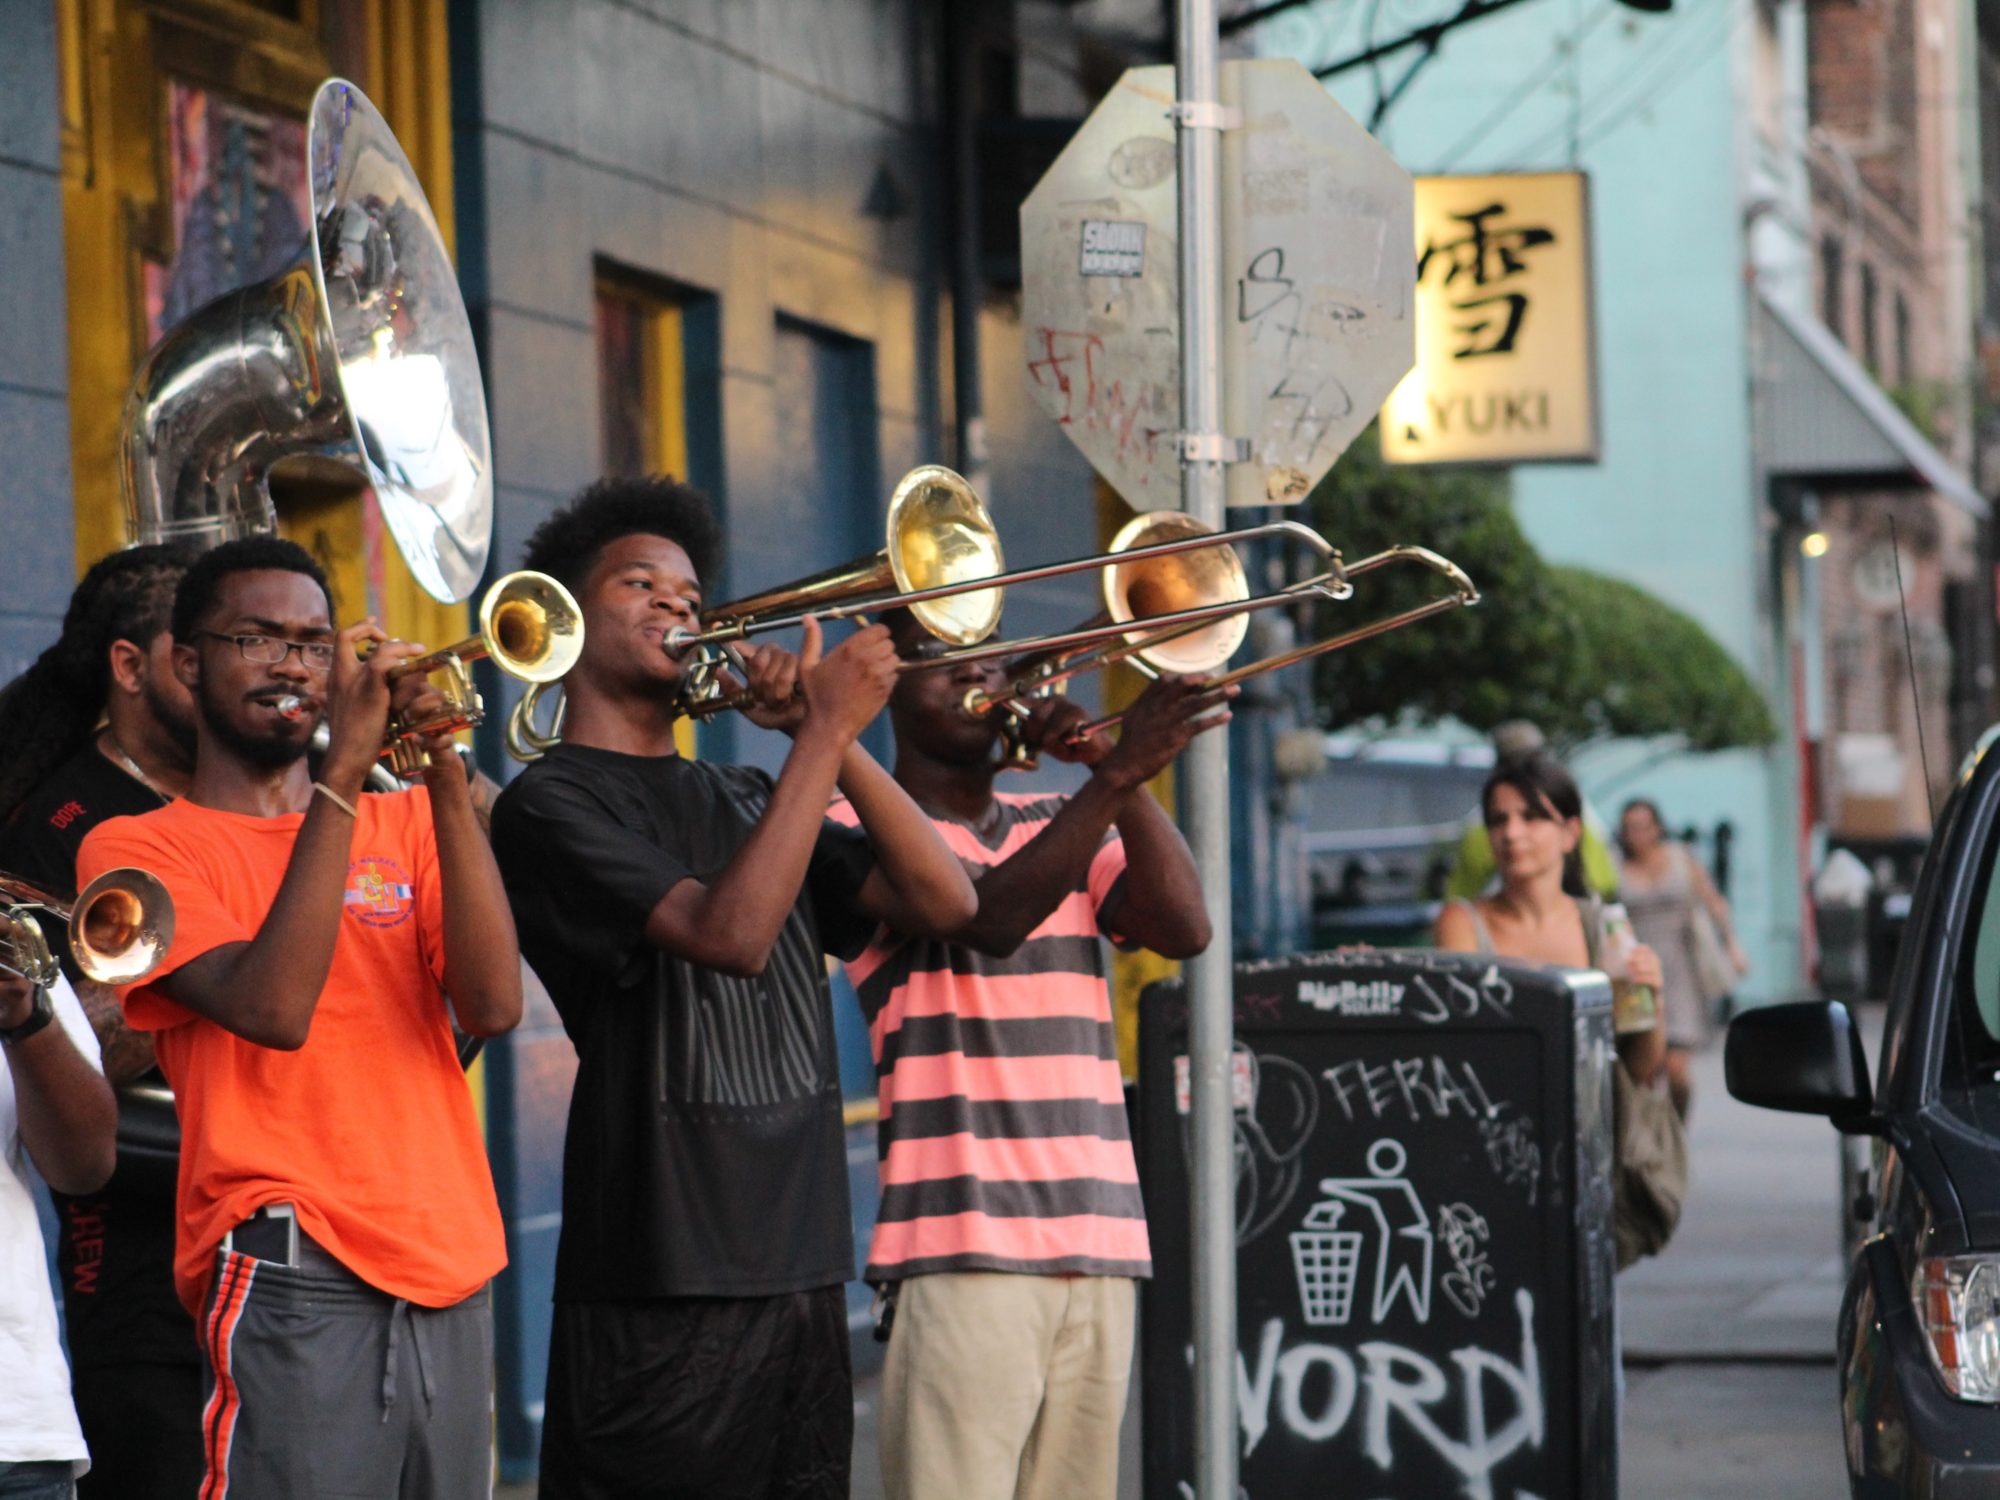 New Orleans - birthplace of jazz